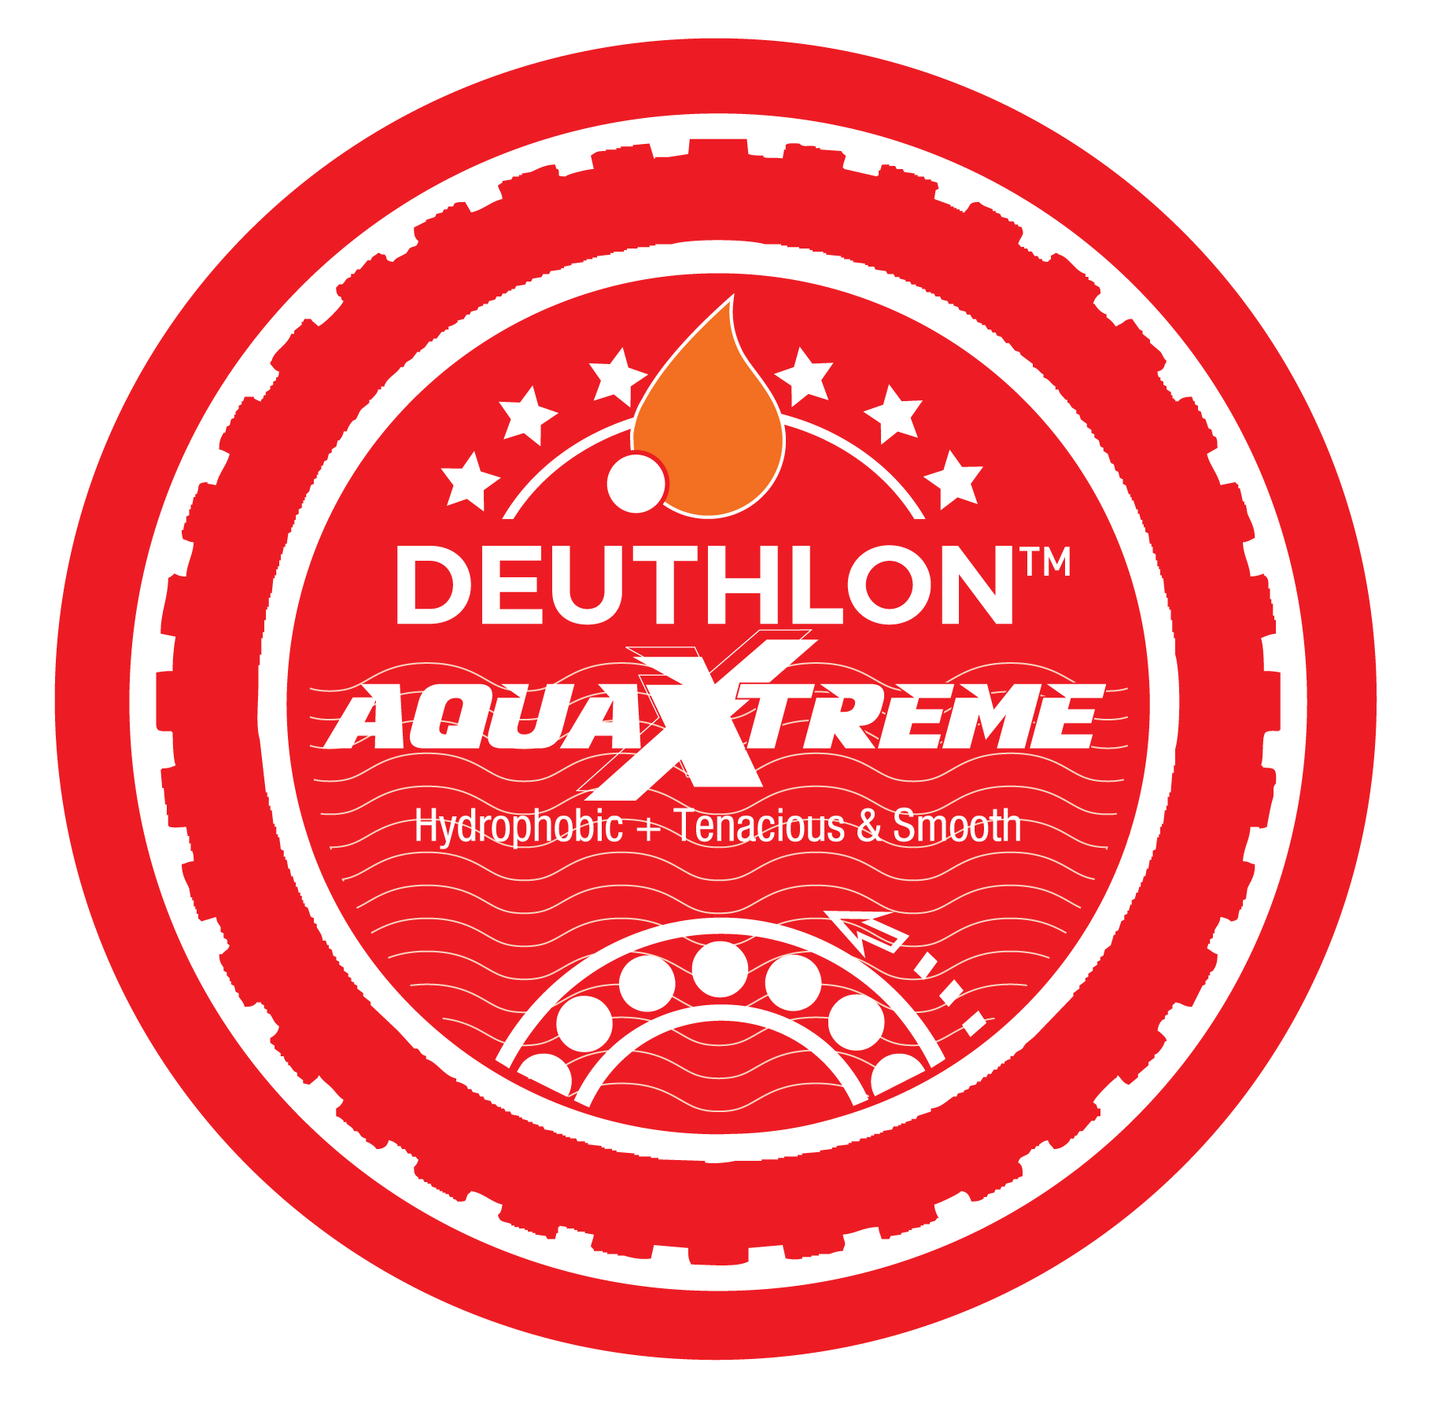 Bike grease to withstand water and high-pressure water jet - Deuthlon